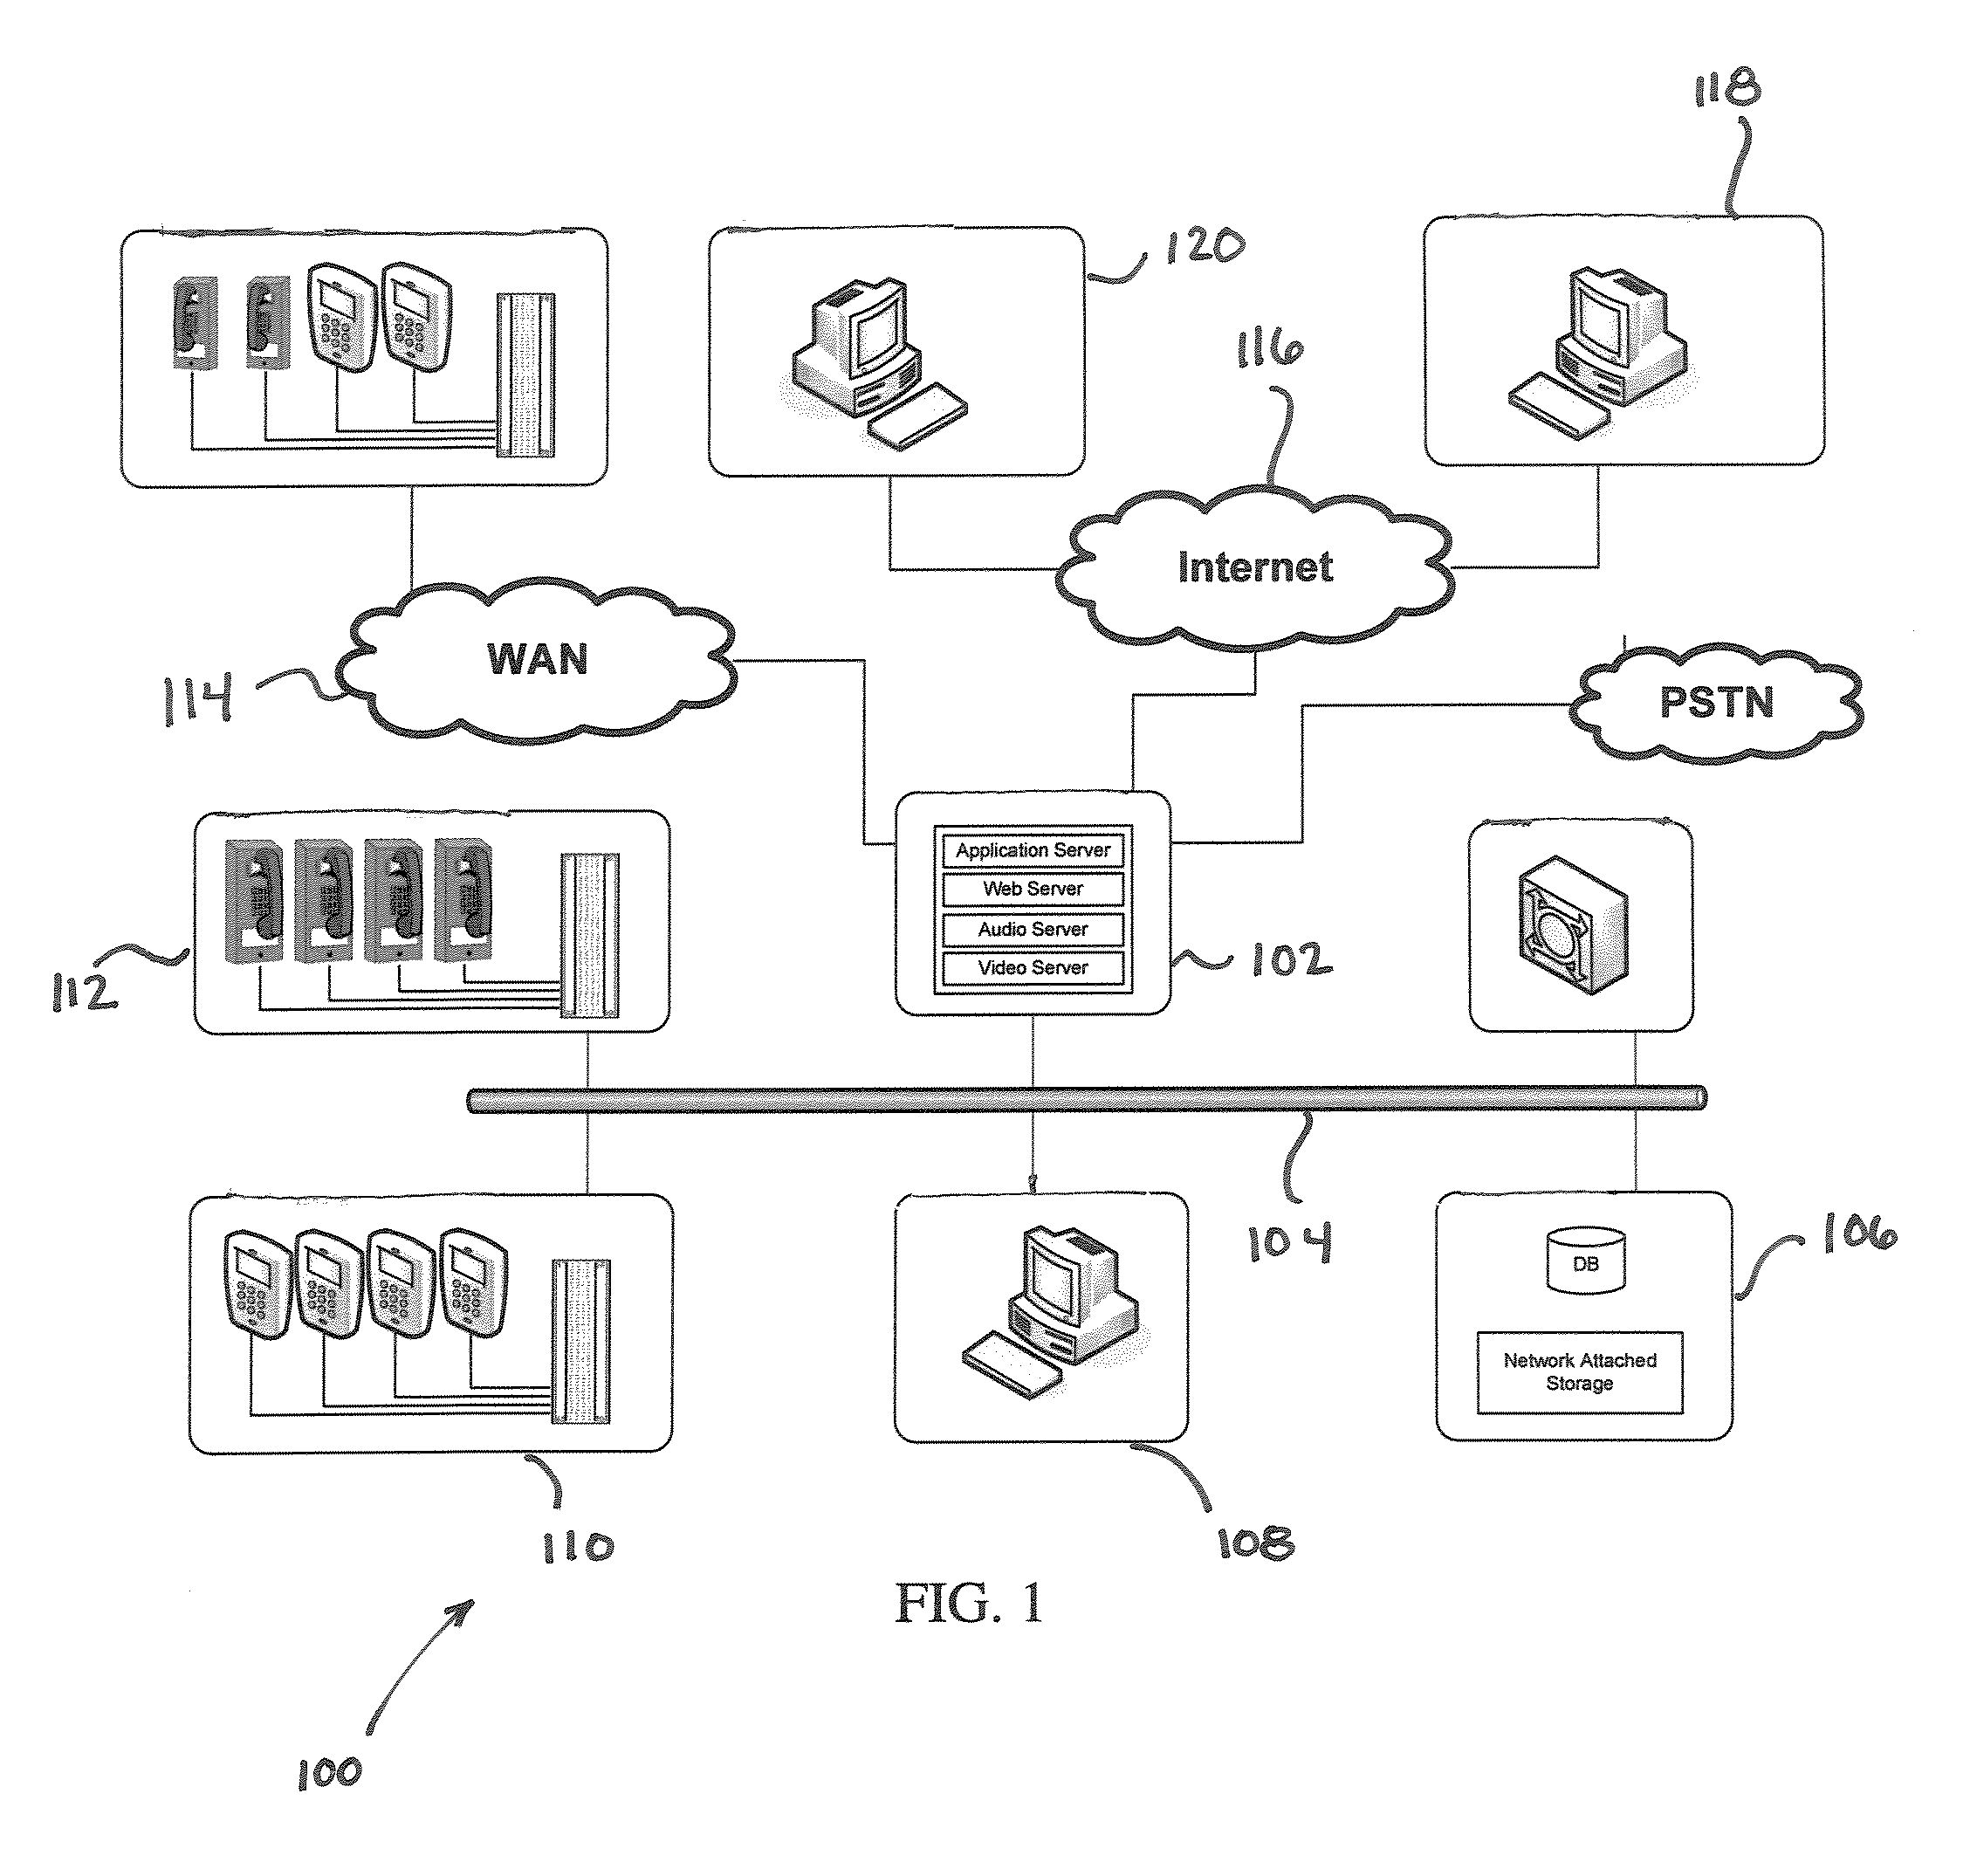 System and method for visitation management in a controlled-access environment